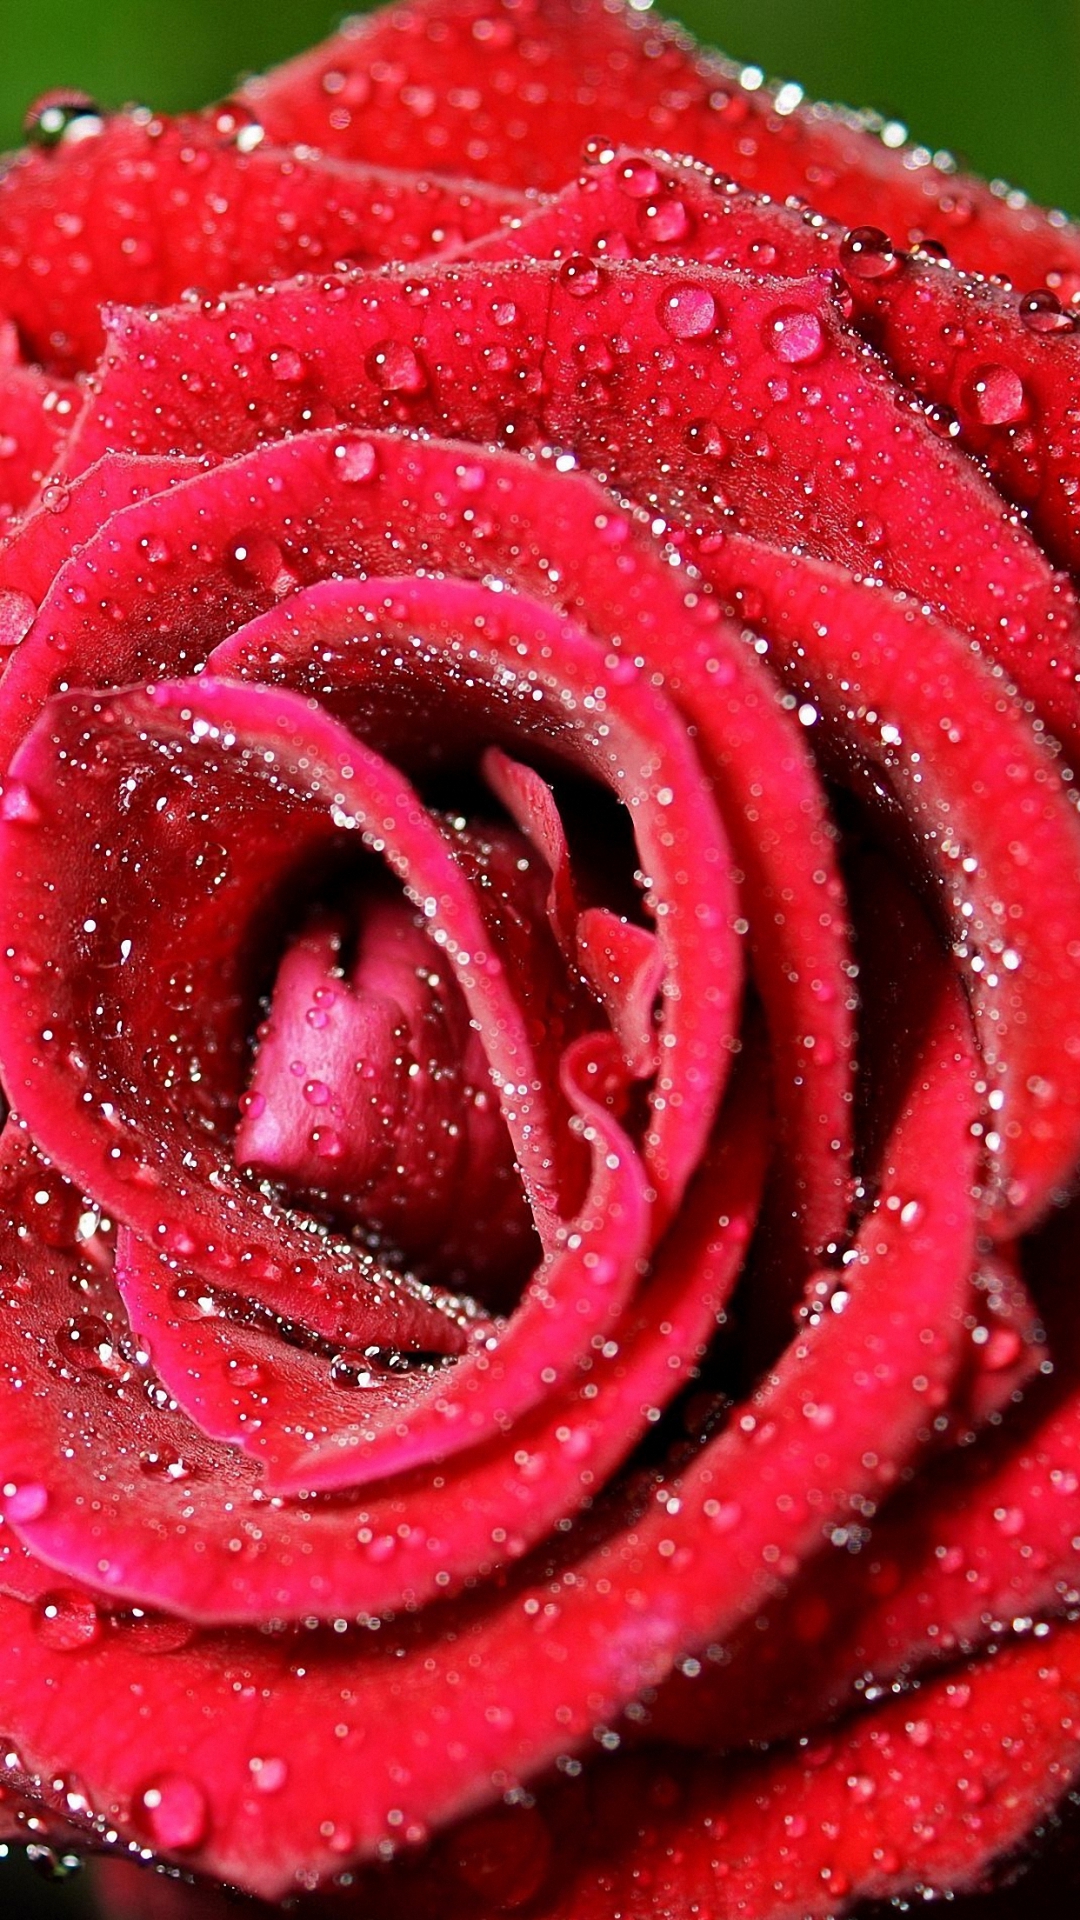 Hd Rose Wallpapers For Mobile Phones